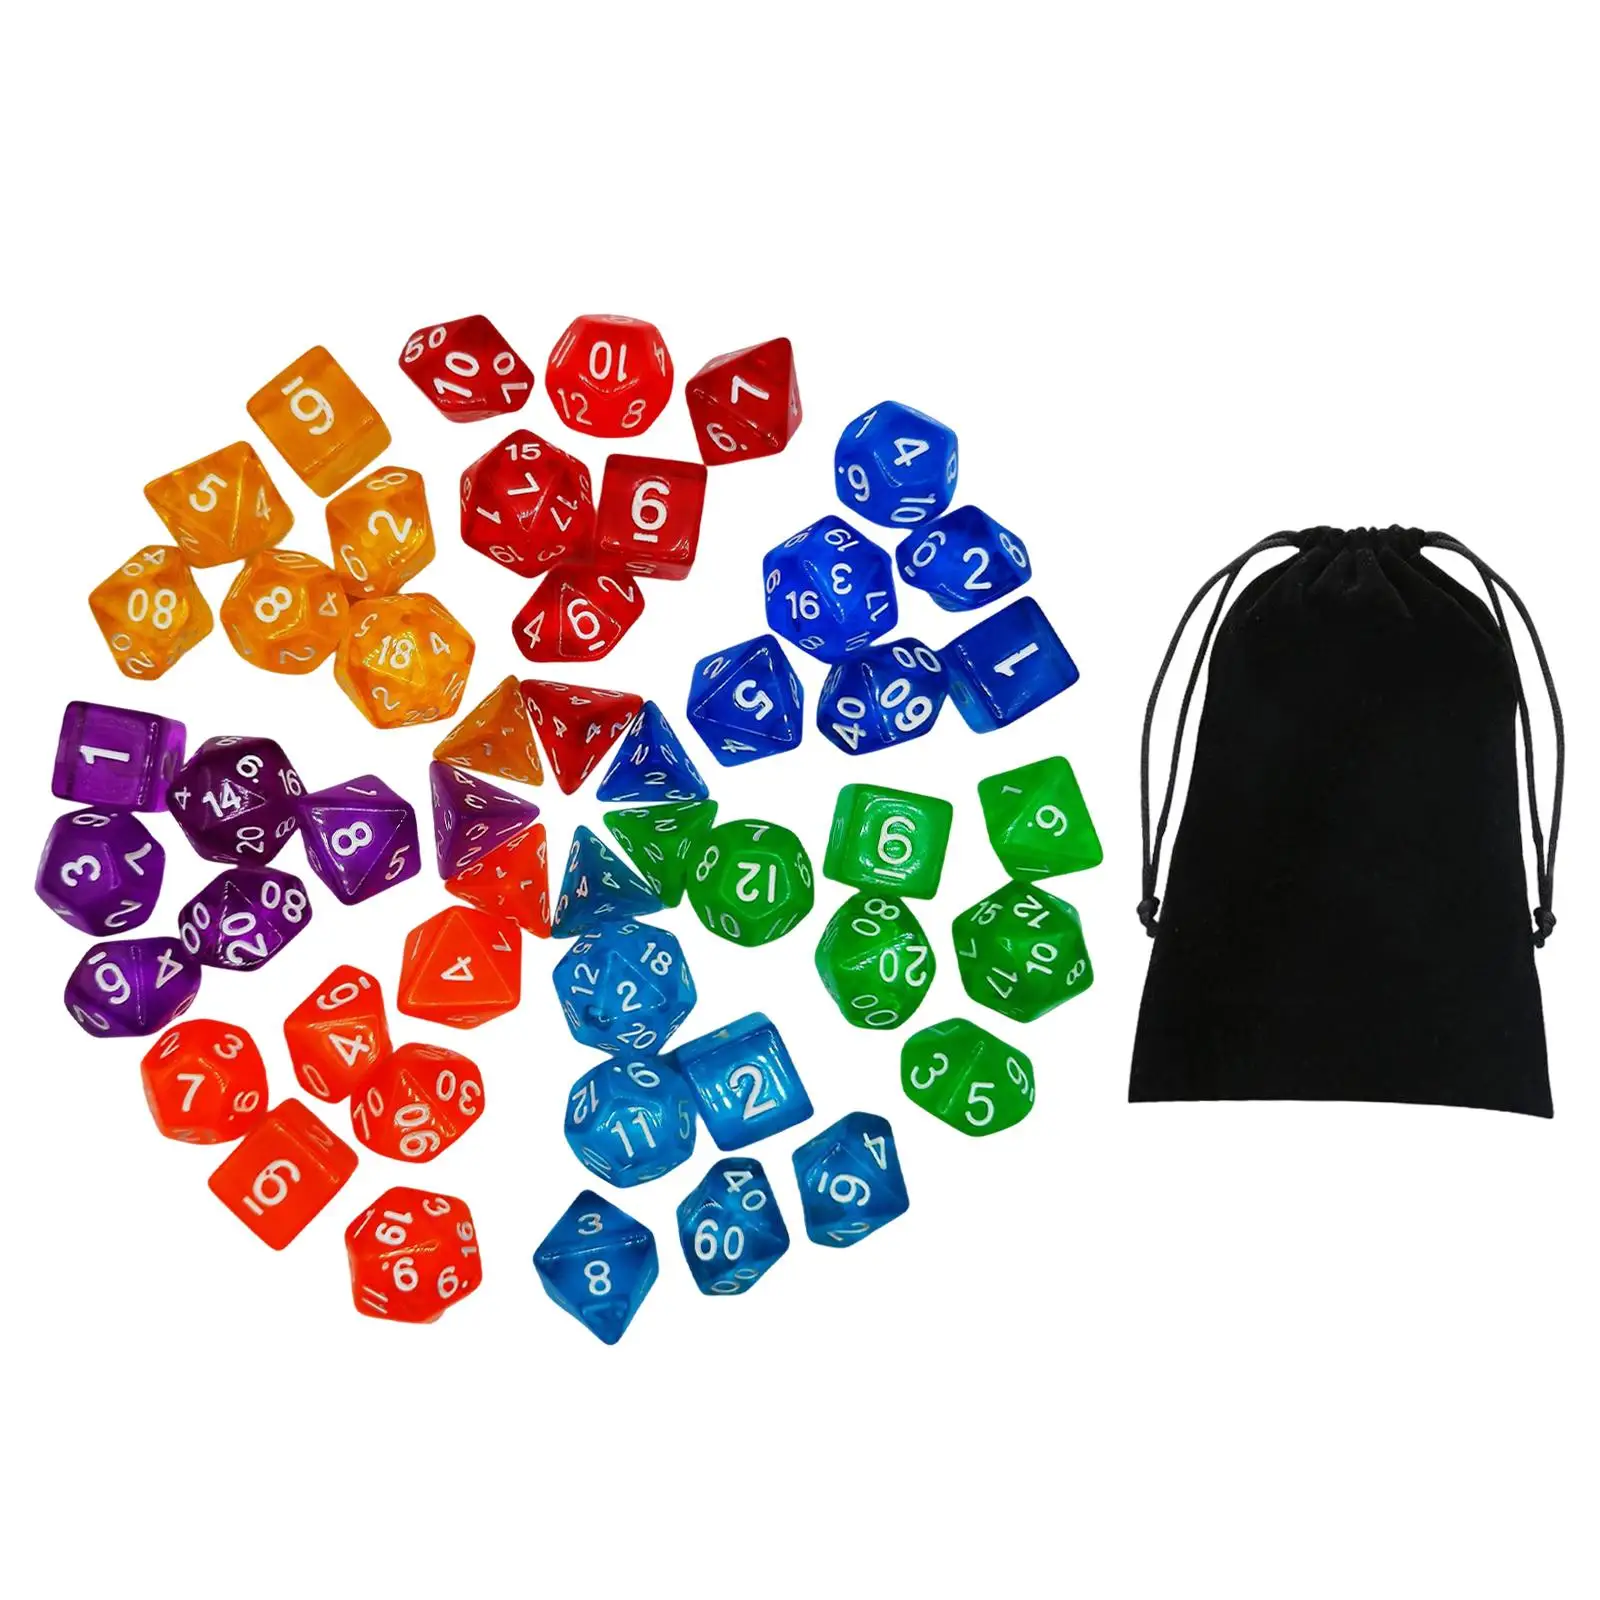 Engraved Polyhedral Dices 49 Pieces Rolling Dices for Beach Day Table Games